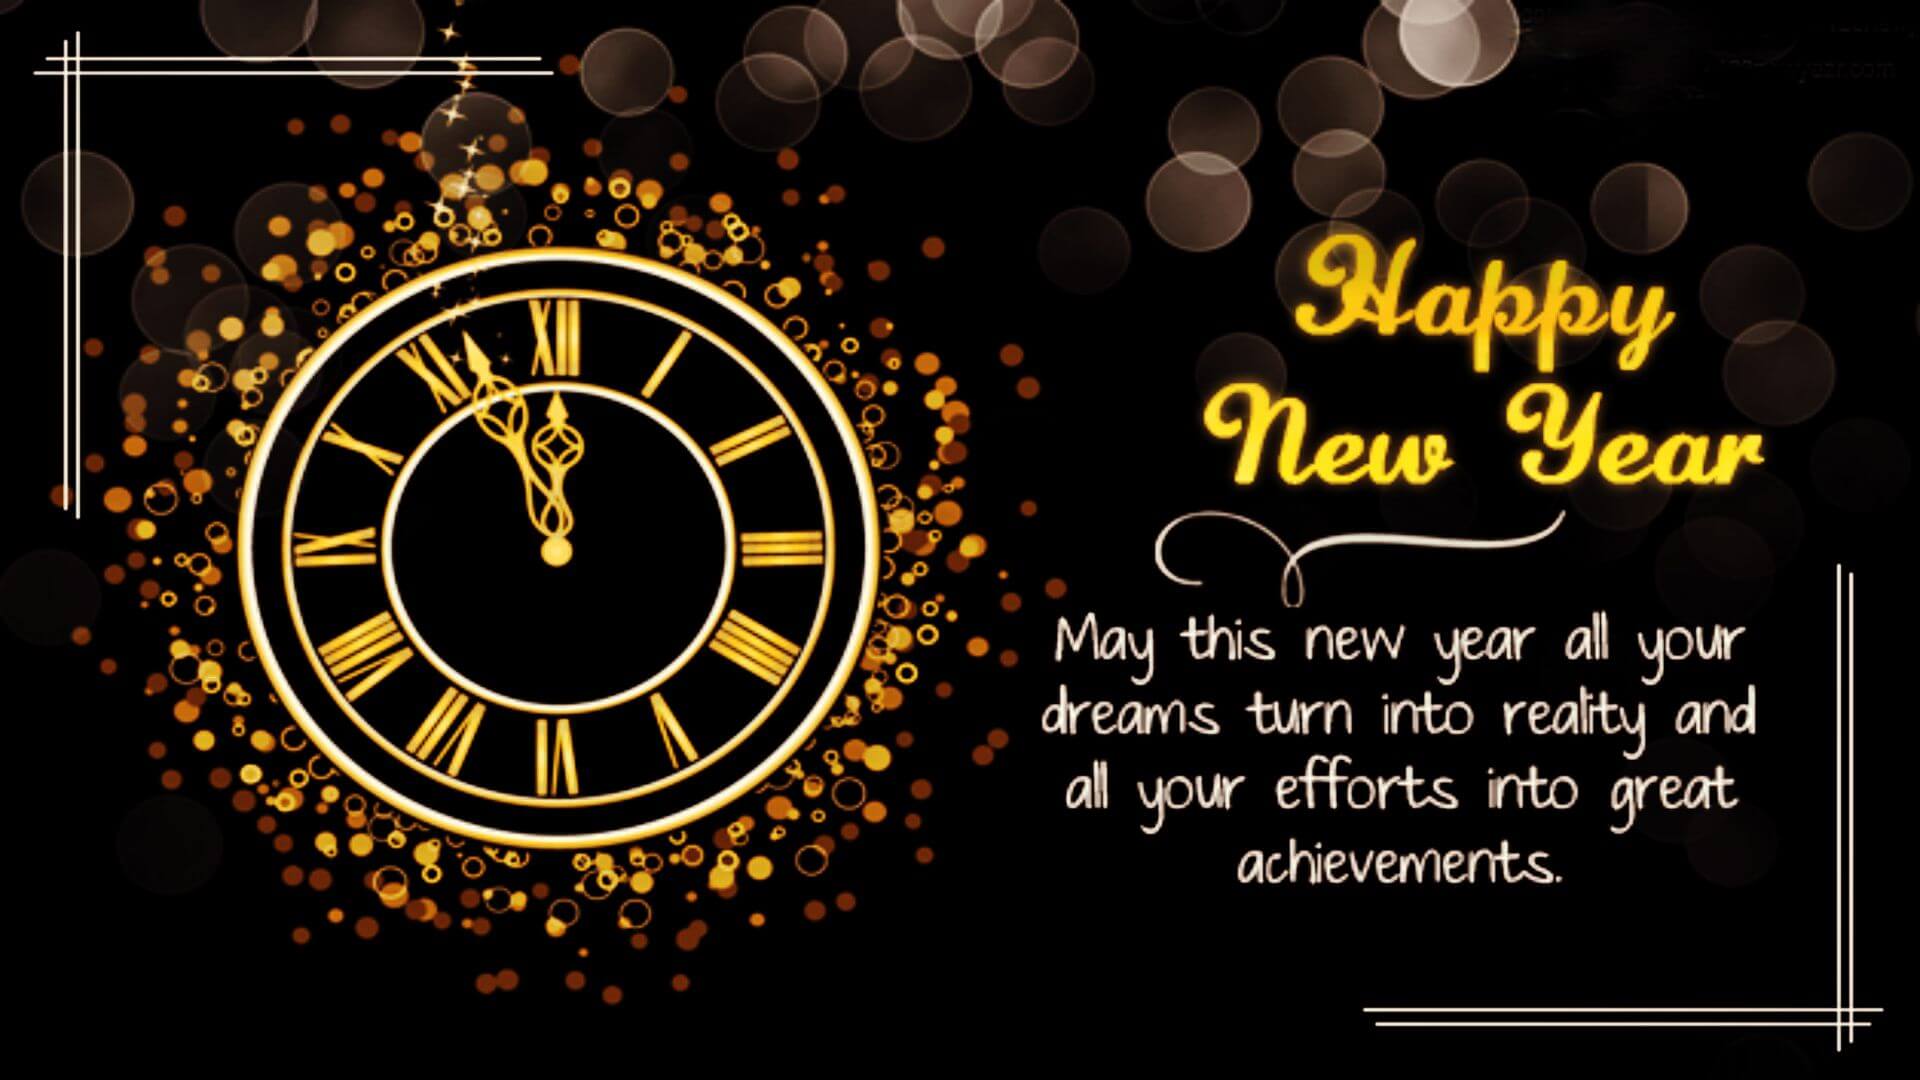 happy new year may this new year all your dreams turn into reality and all your efforts into great